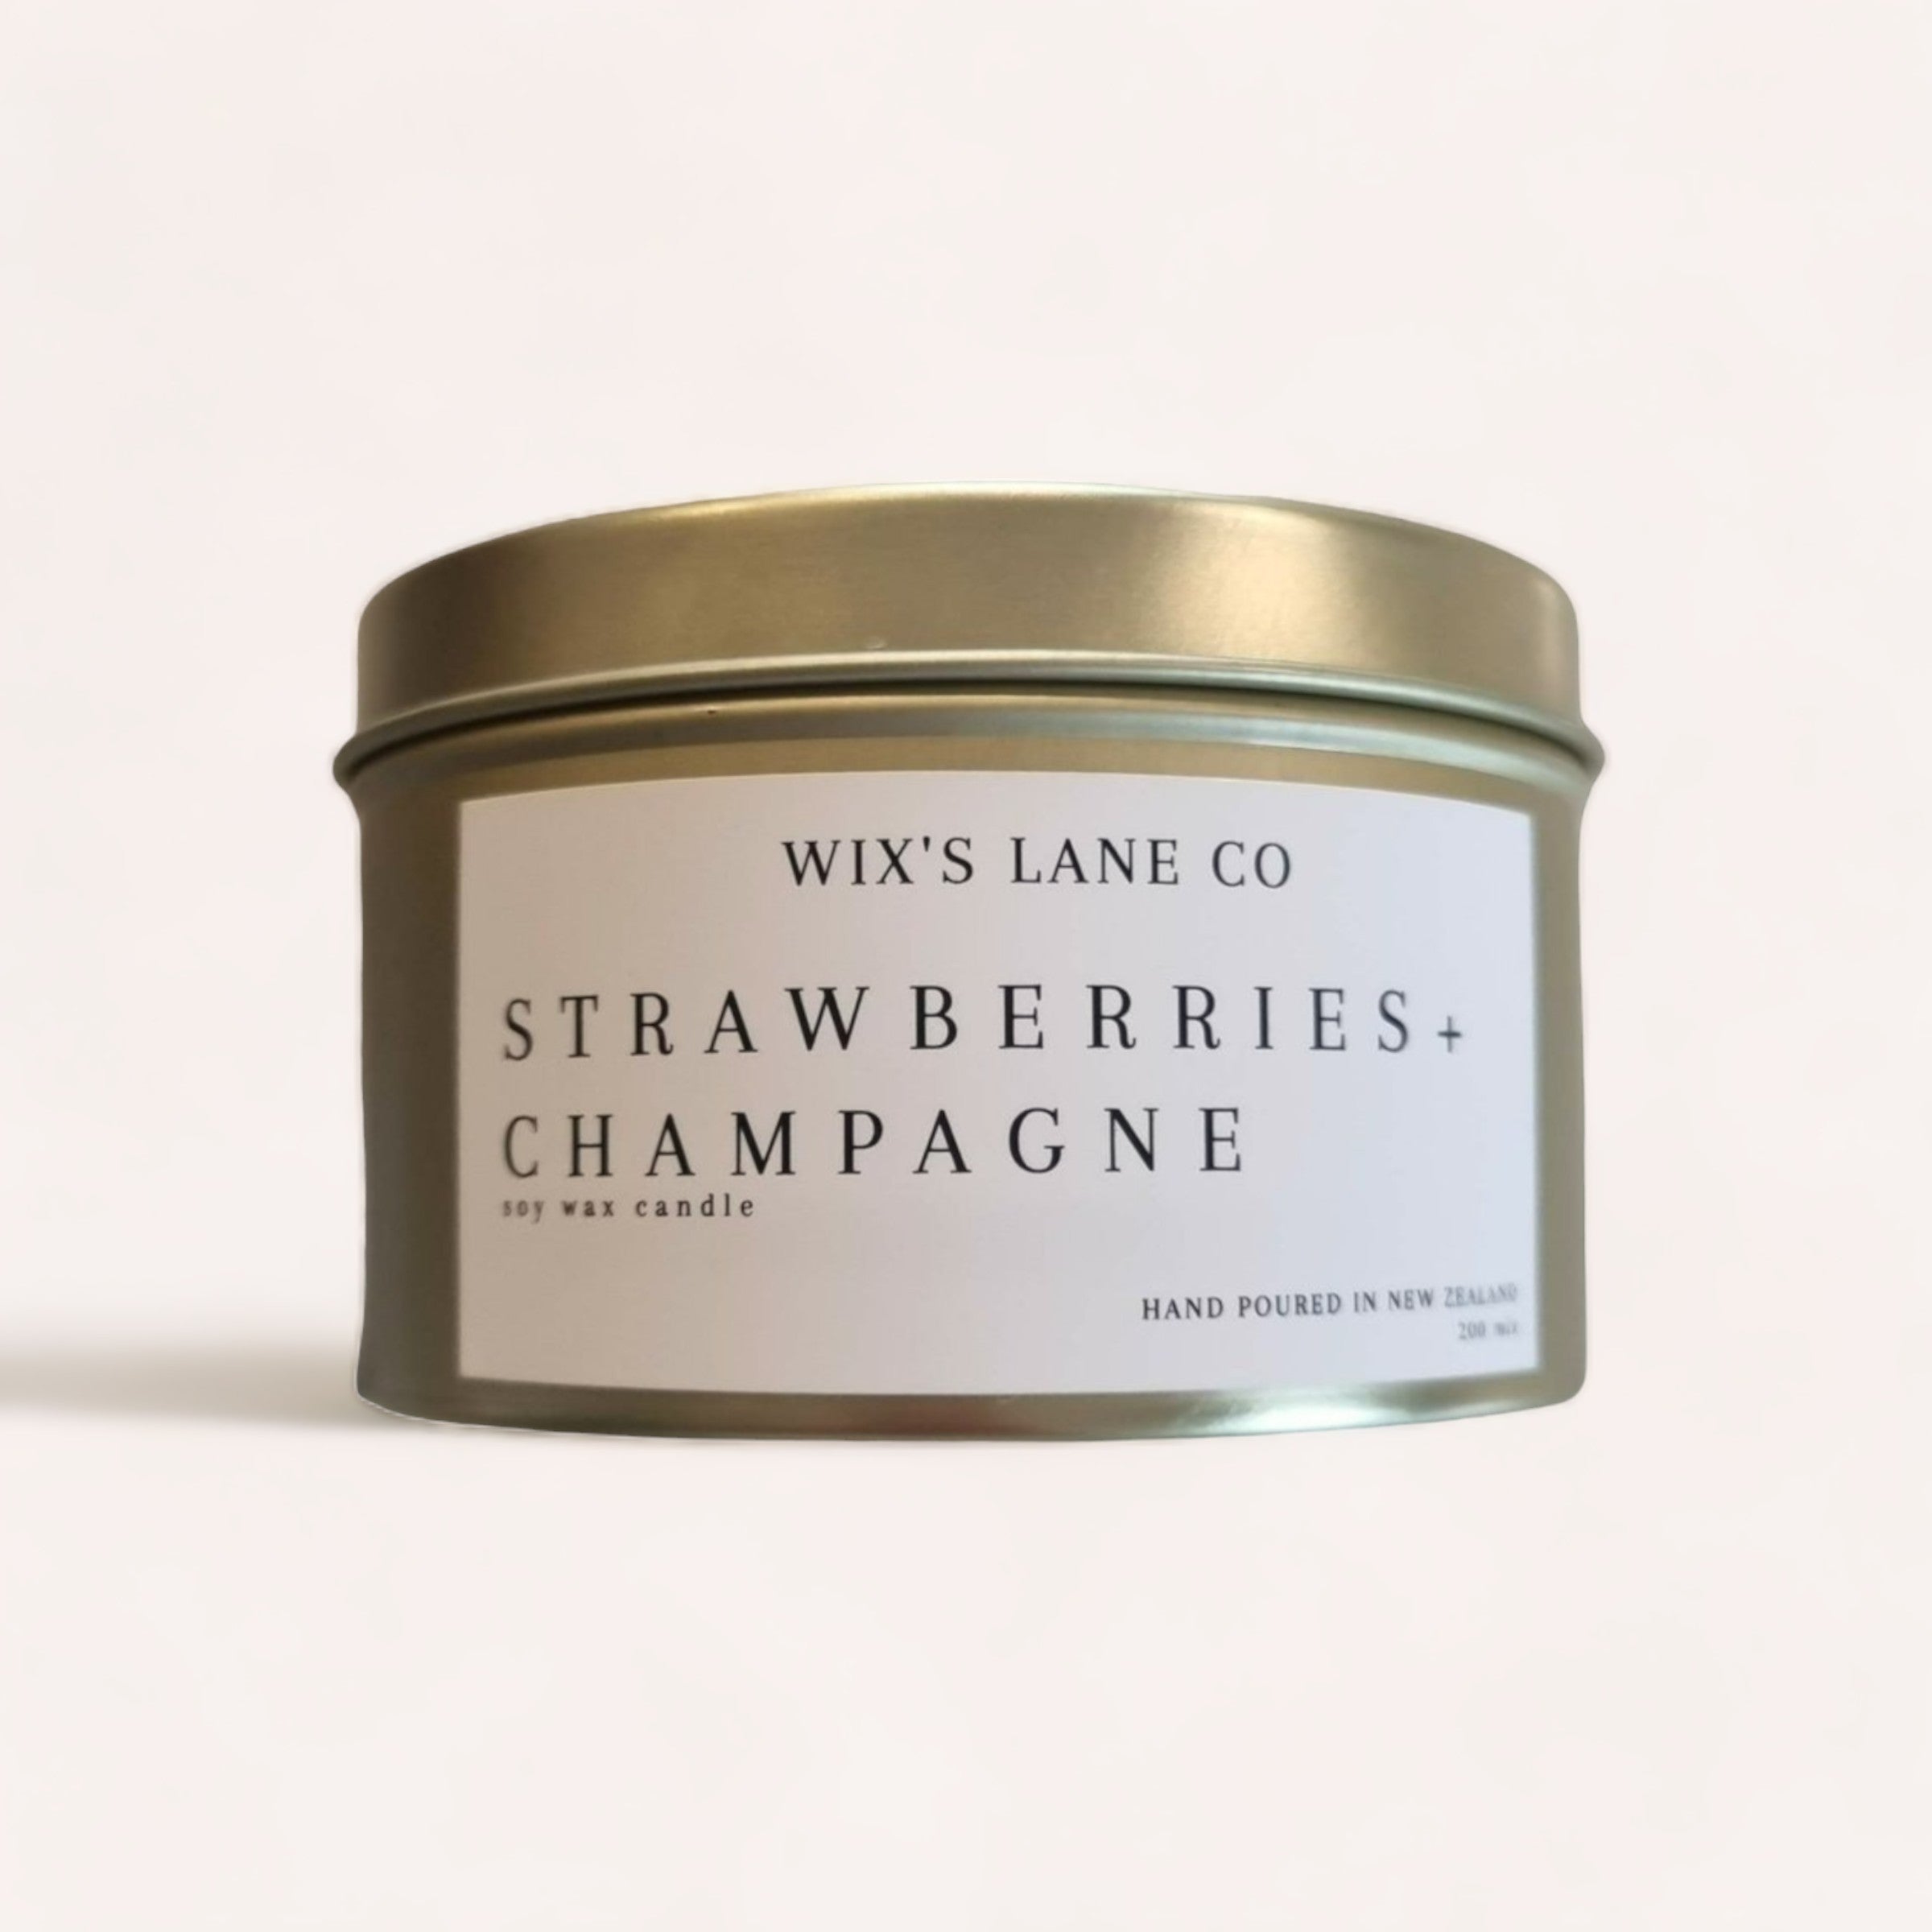 A Strawberries + Champagne Candle by Wix's Lane Co. with a soy wax, hand-poured in New Zealand, presented in a reusable gold tin against a clean, neutral background.